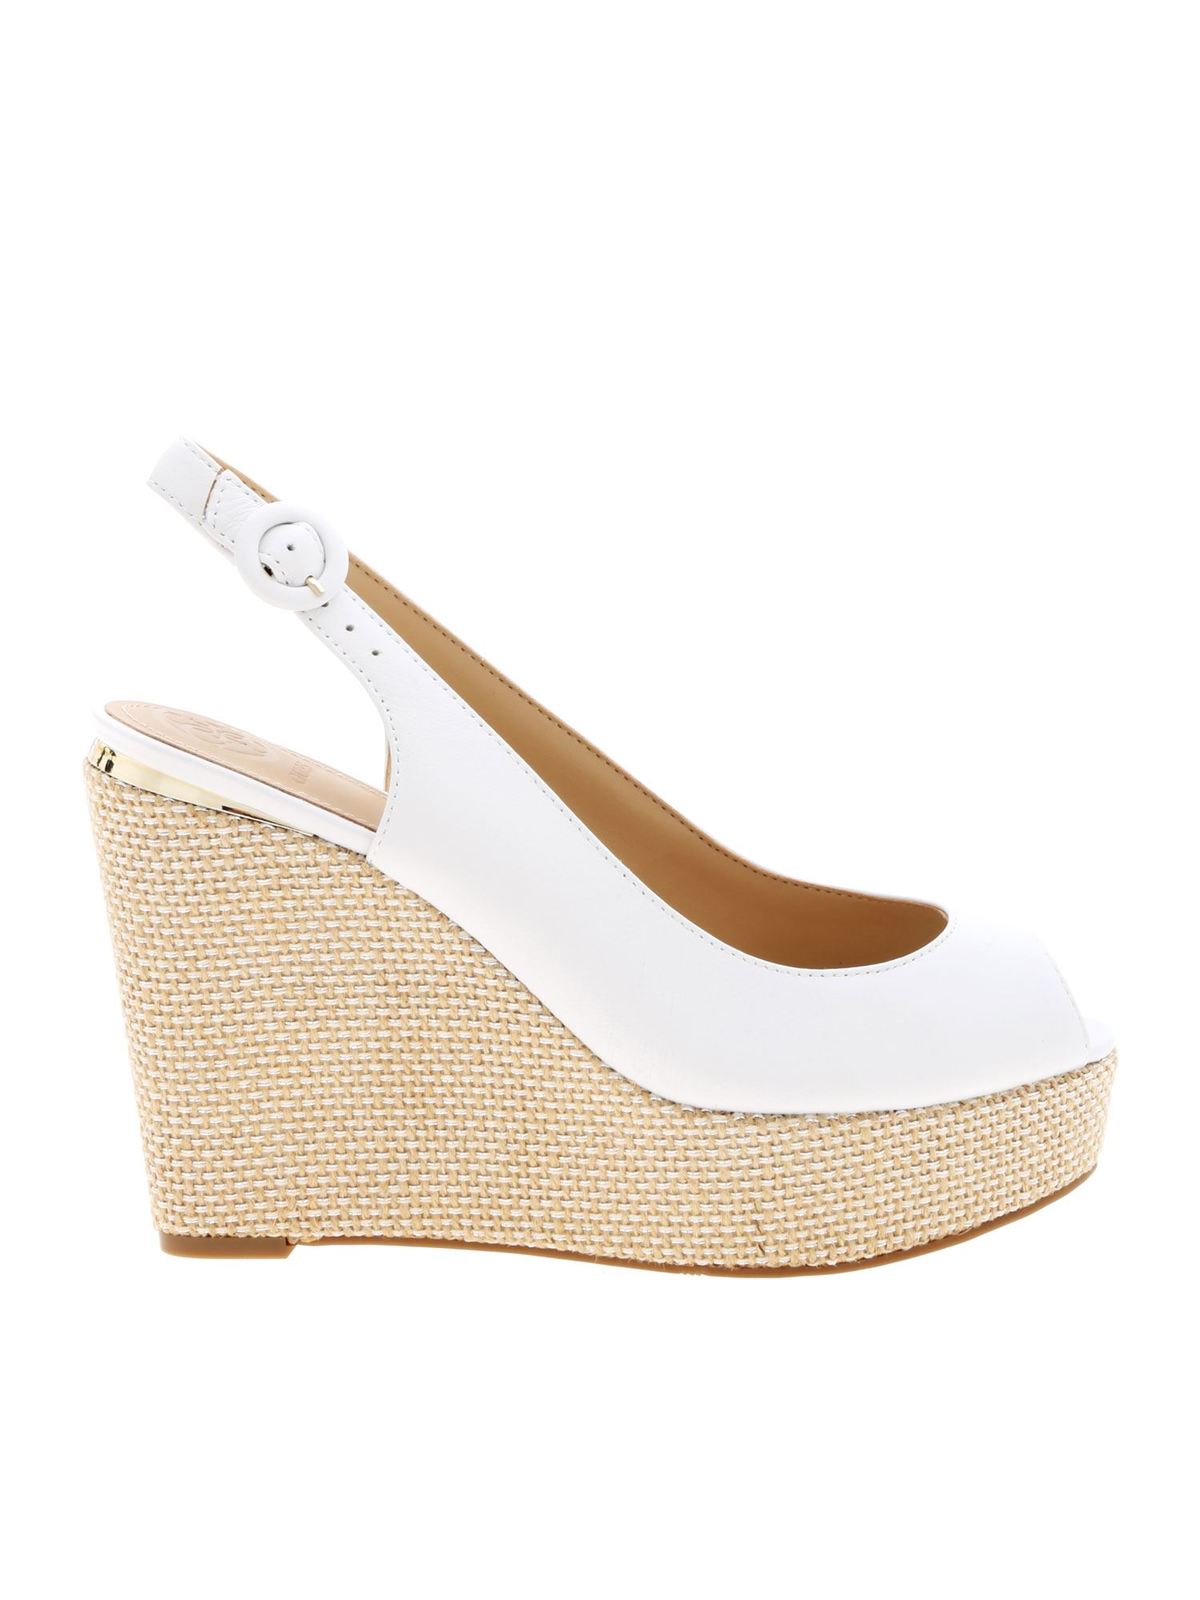 guess wedges white